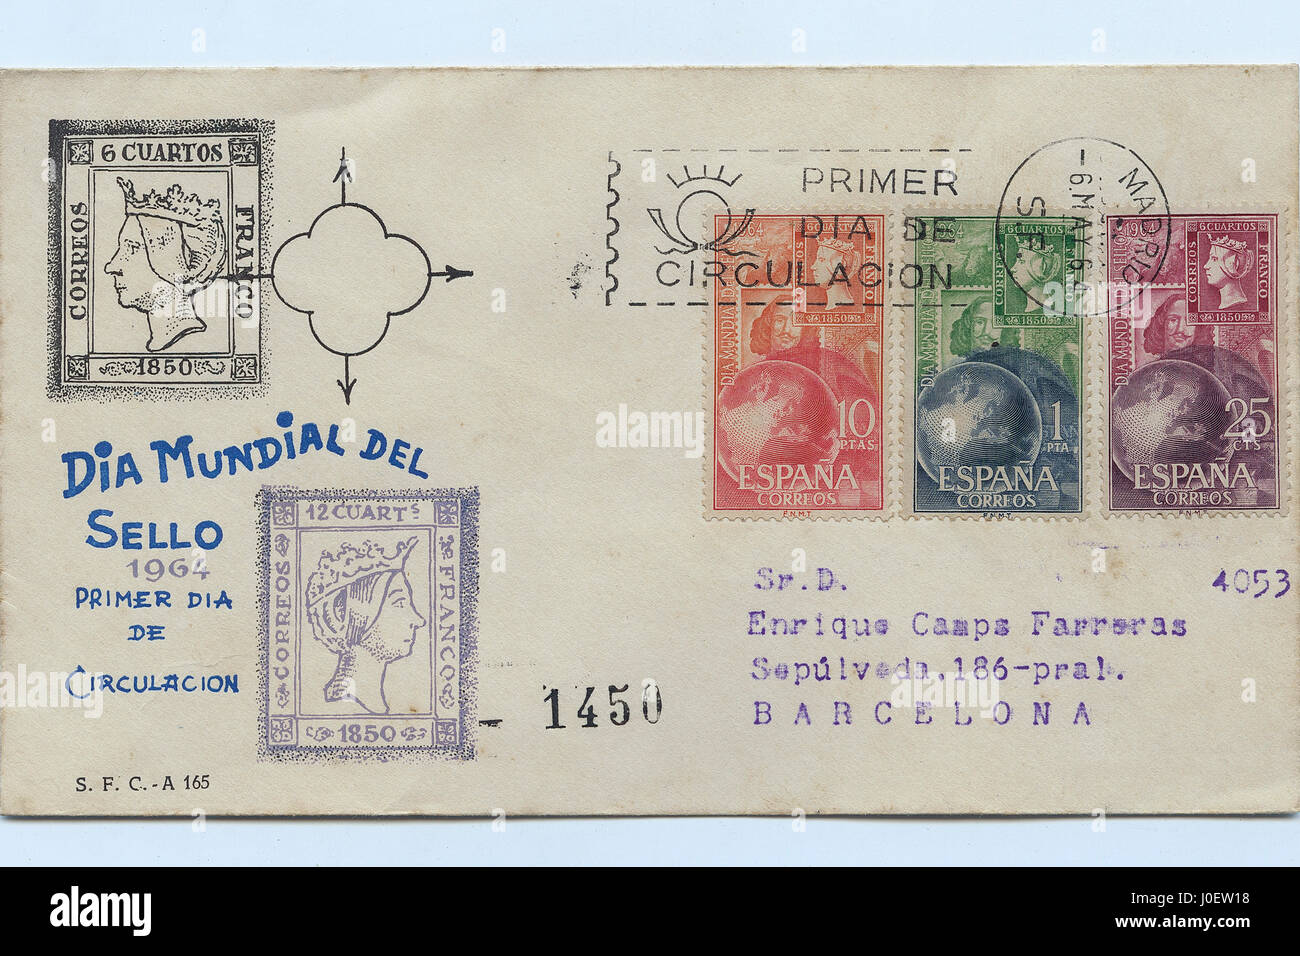 First day cover of postage stamps of Spain 1964 Stock Photo